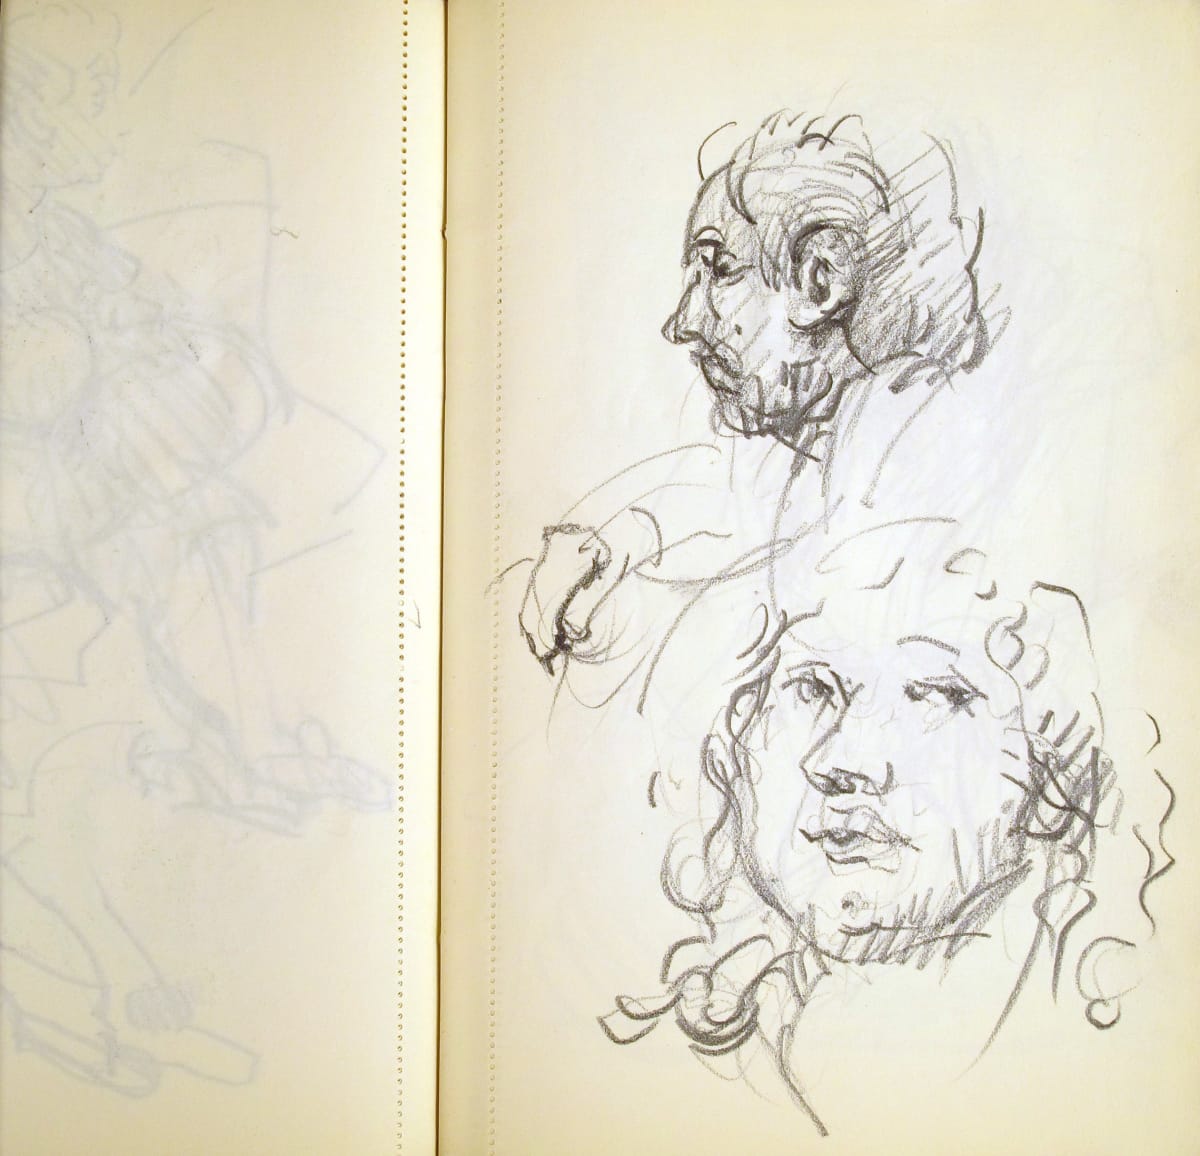 Sketchbook #2002 pencil sketches [1973-1974] commuters, Christmas angels  Image: #2002.63